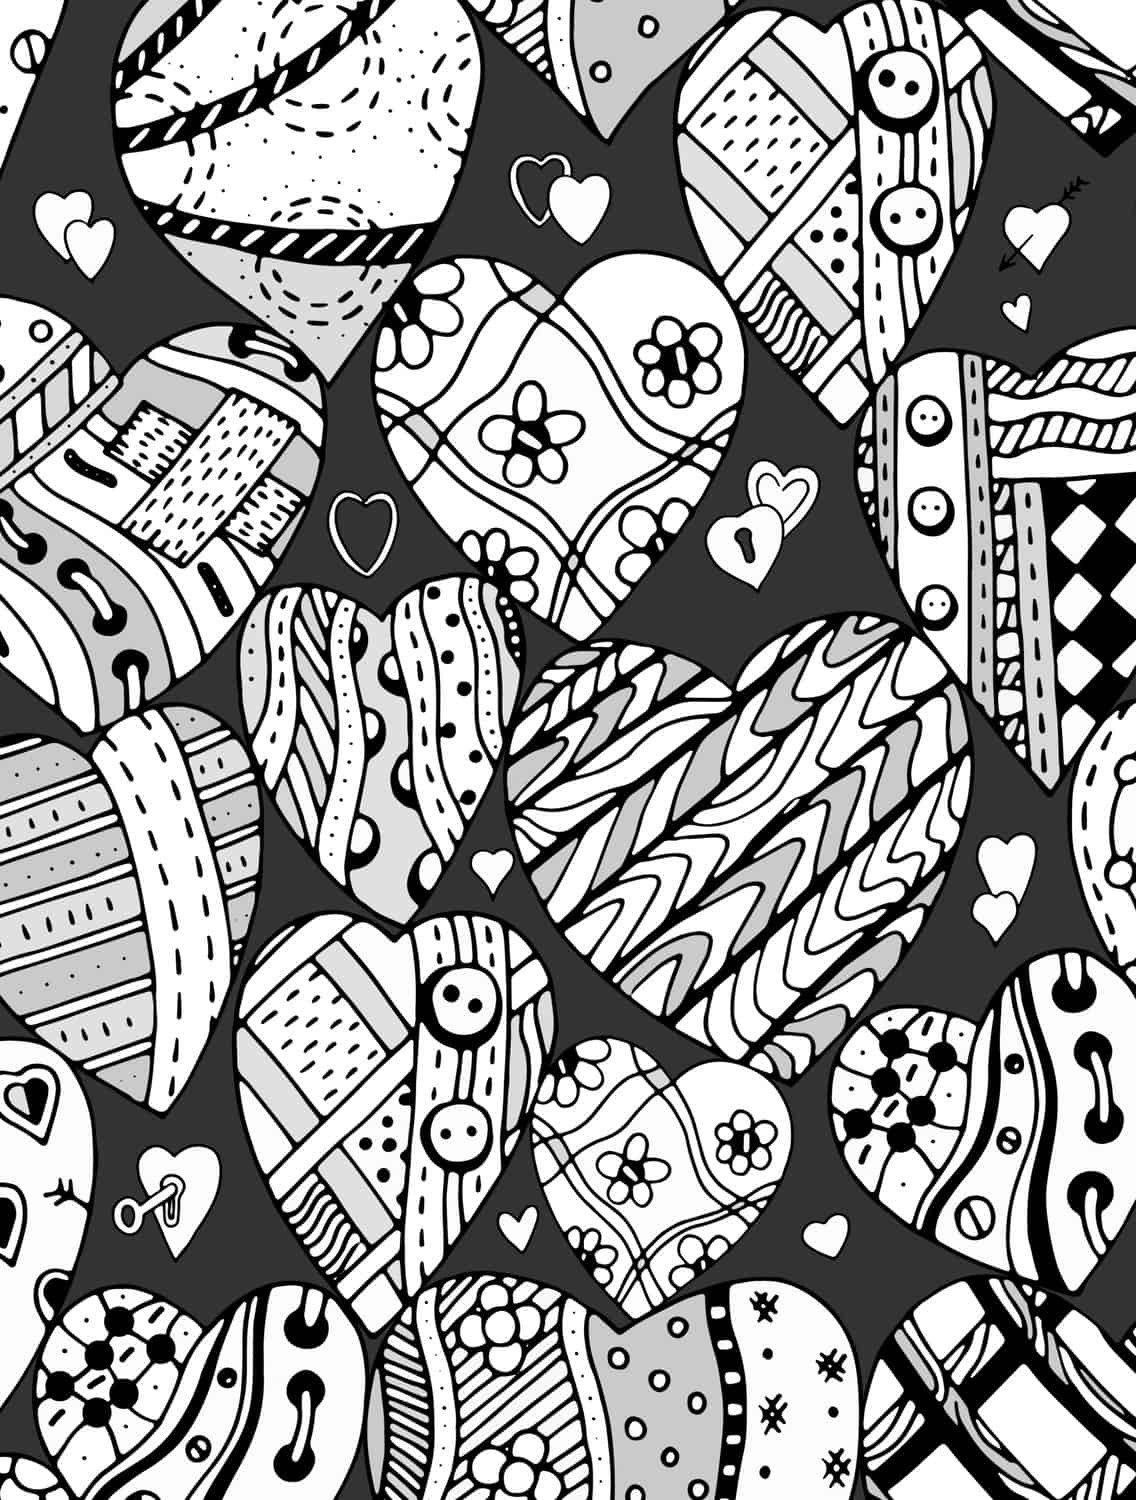 Printable Adult Coloring Pages
 20 Free Printable Valentines Adult Coloring Pages Nerdy